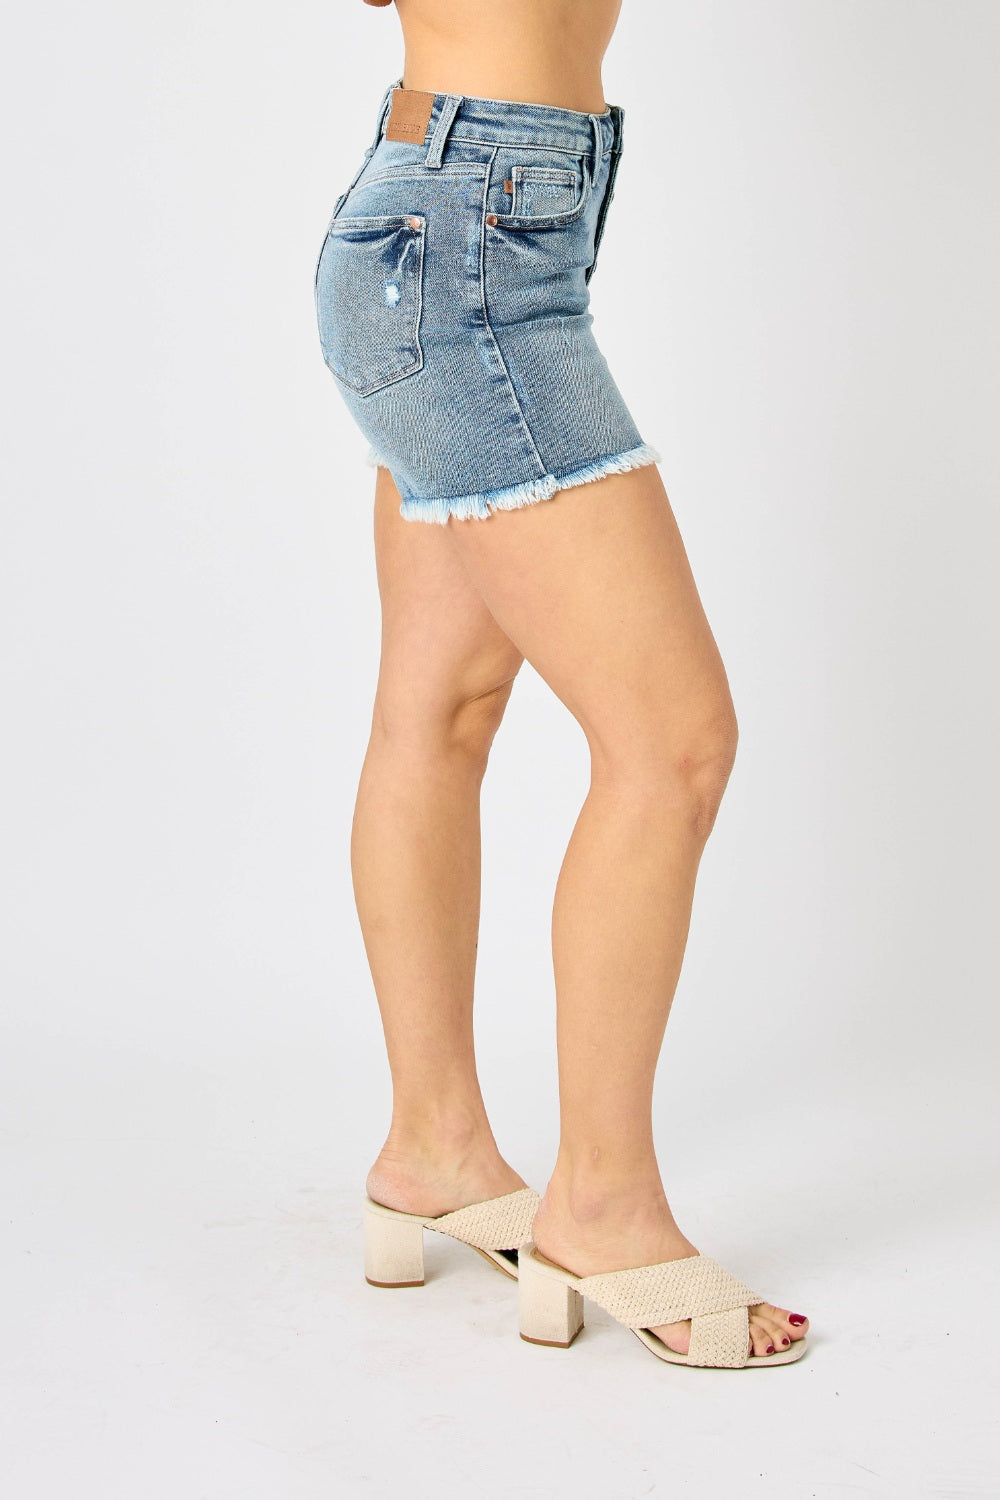 Side VIew, Judy Blue, High-Waist Faded Blue Cut-Off Jeans Shorts Style 150206